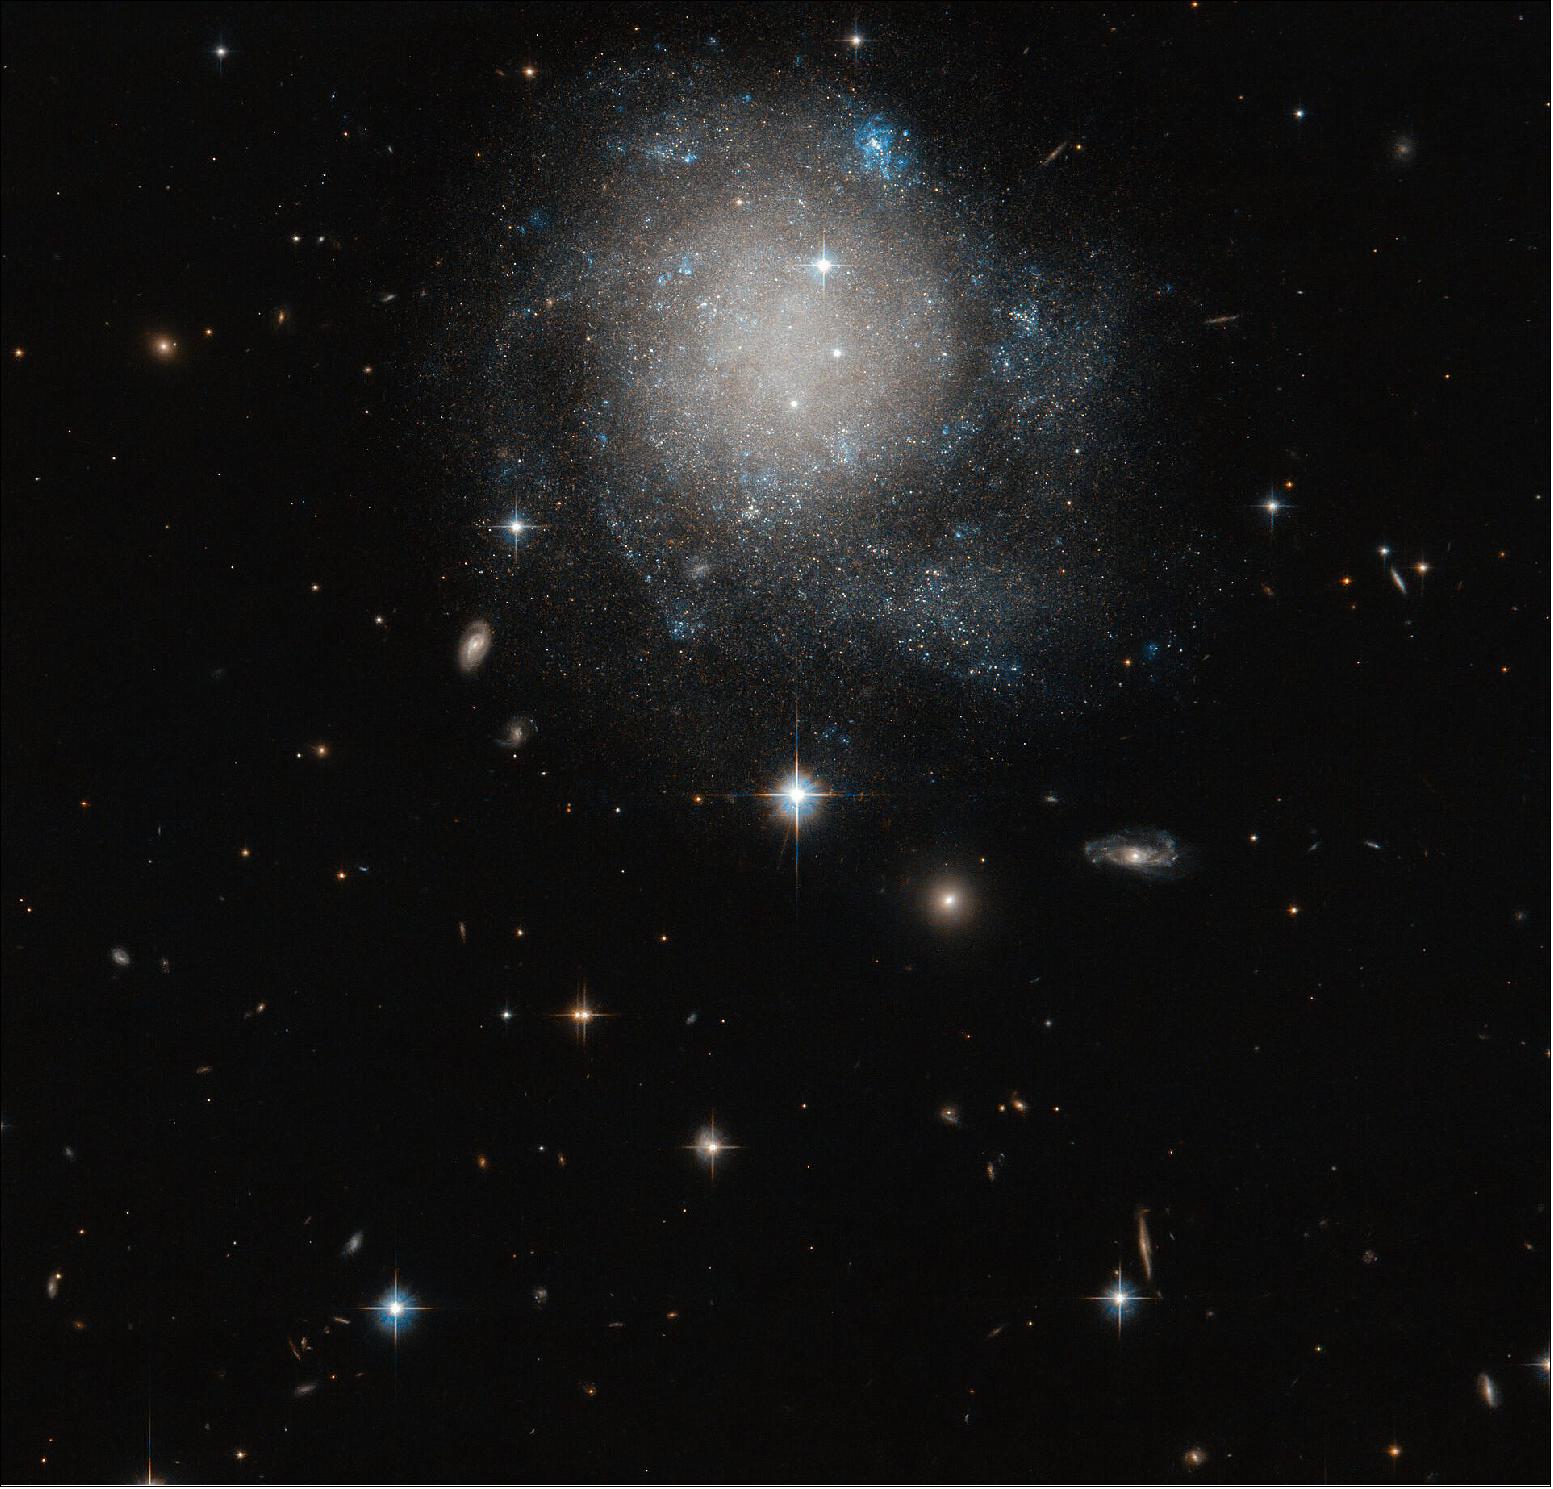 Figure 11: Observed with the NASA/ESA Hubble Space Telescope, the faint galaxy featured in this image is known as UGC 12588. Unlike many spiral galaxies, UGC 12588 displays neither a bar of stars across its centre nor the classic prominent spiral arm pattern. Instead, to a viewer, its circular, white and mostly unstructured centre makes this galaxy more reminiscent of a cinnamon bun than a mega-structure of stars and gas in space (image credit: ESA/Hubble & NASA, R. Tully; CC BY 4.0 - Acknowledgement: Gagandeep Anand)